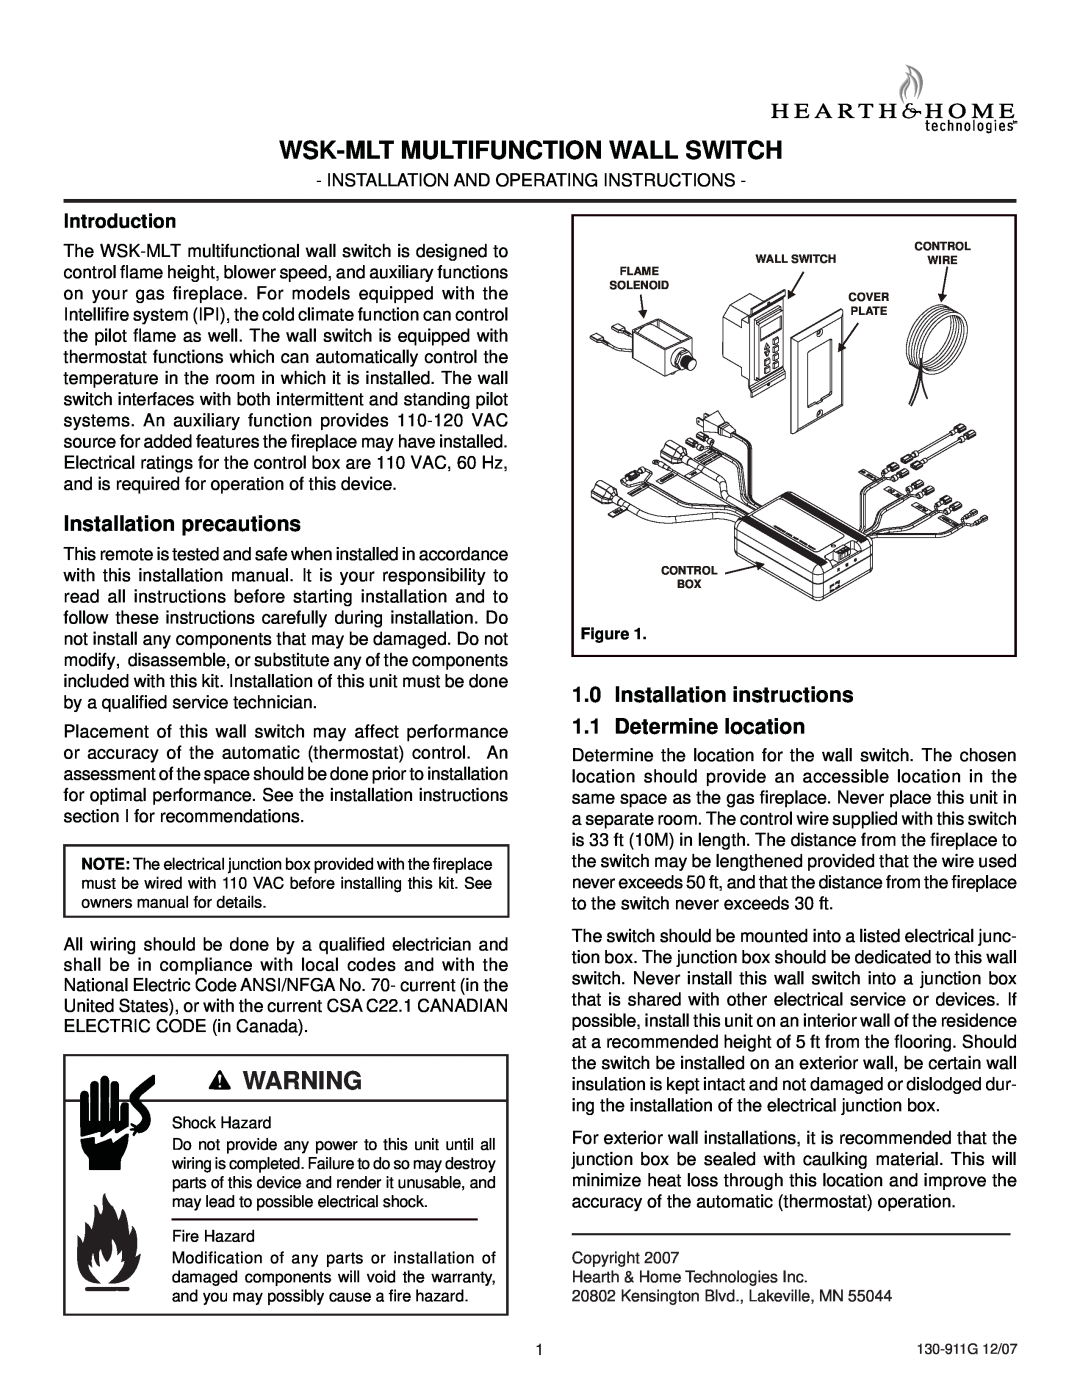 Hearth and Home Technologies WSK-MLT installation instructions Installation precautions, Installation instructions 